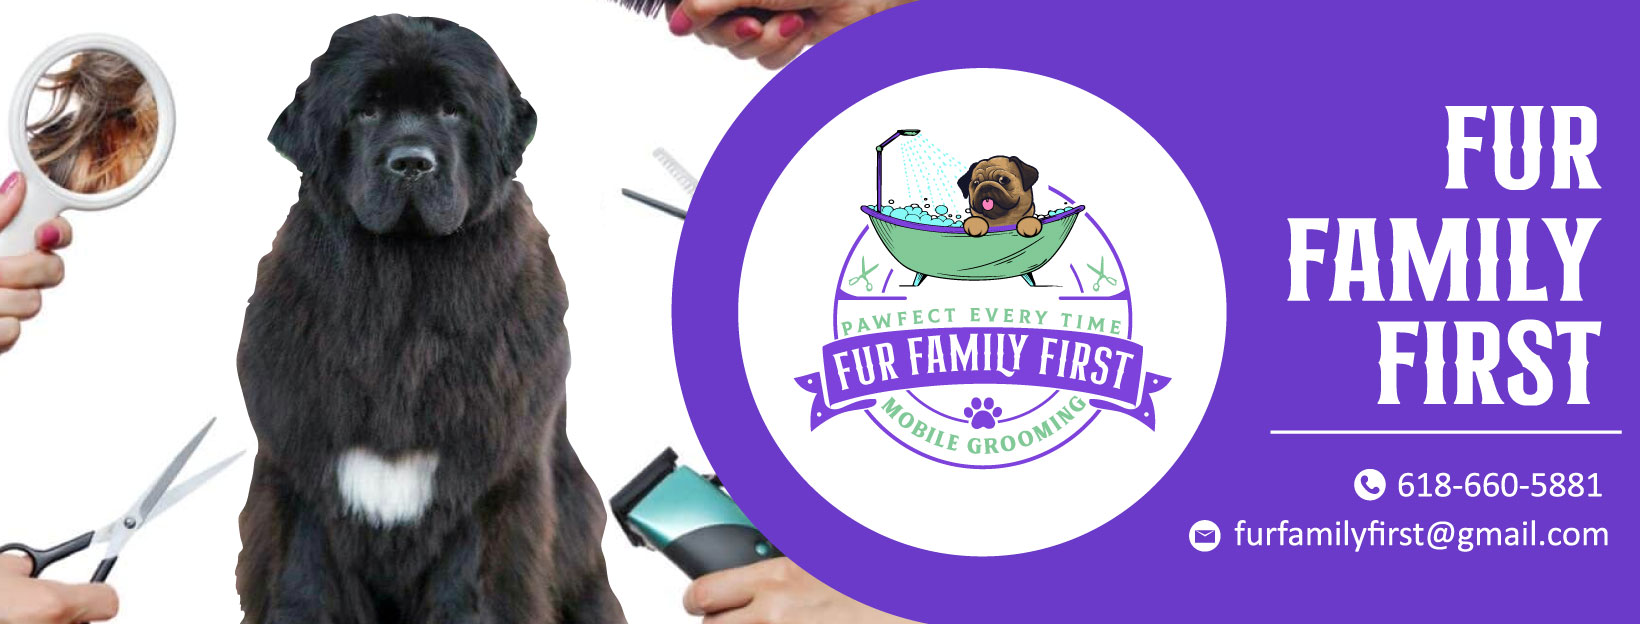 Fur Family First